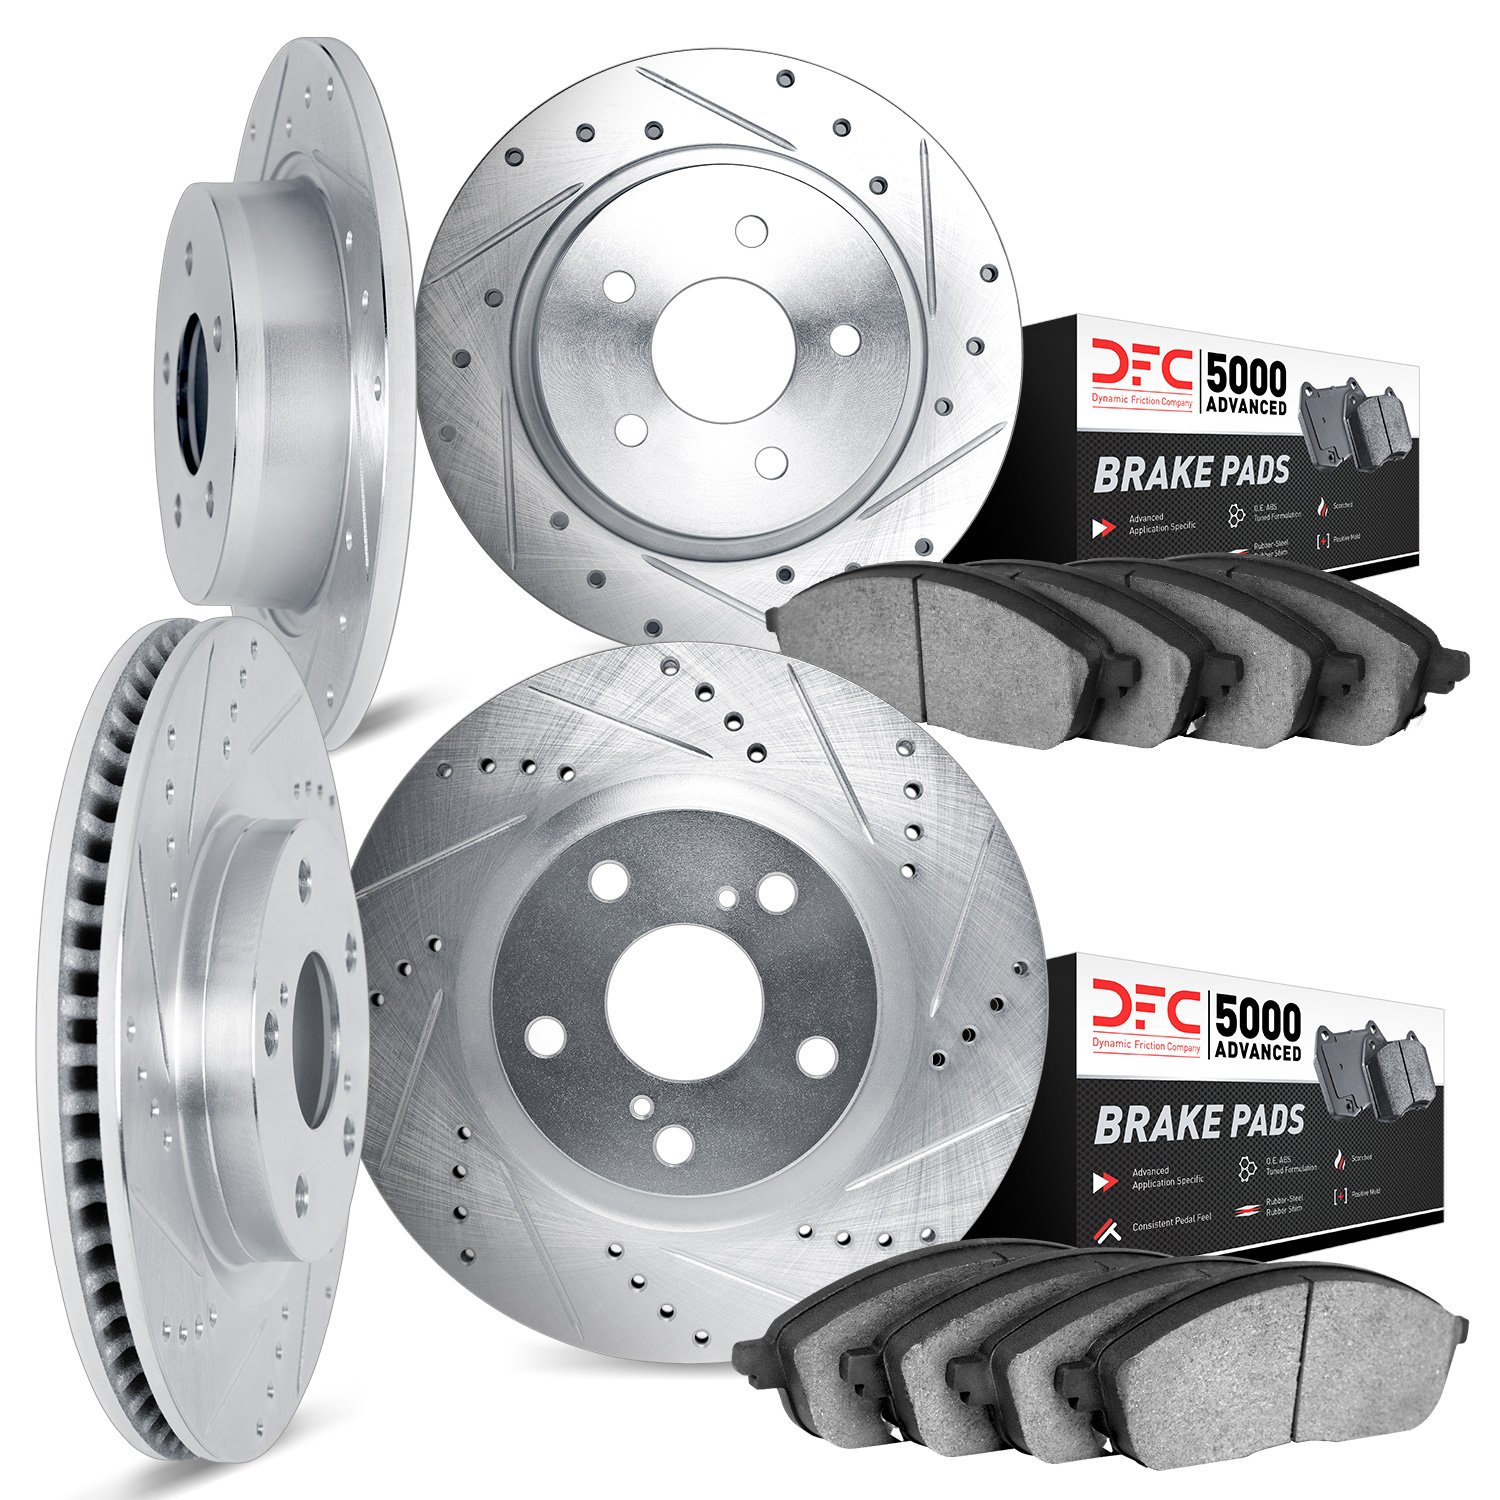 7504-74066 Drilled/Slotted Brake Rotors w/5000 Advanced Brake Pads Kit [Silver], 2005-2013 Audi/Volkswagen, Position: Front and